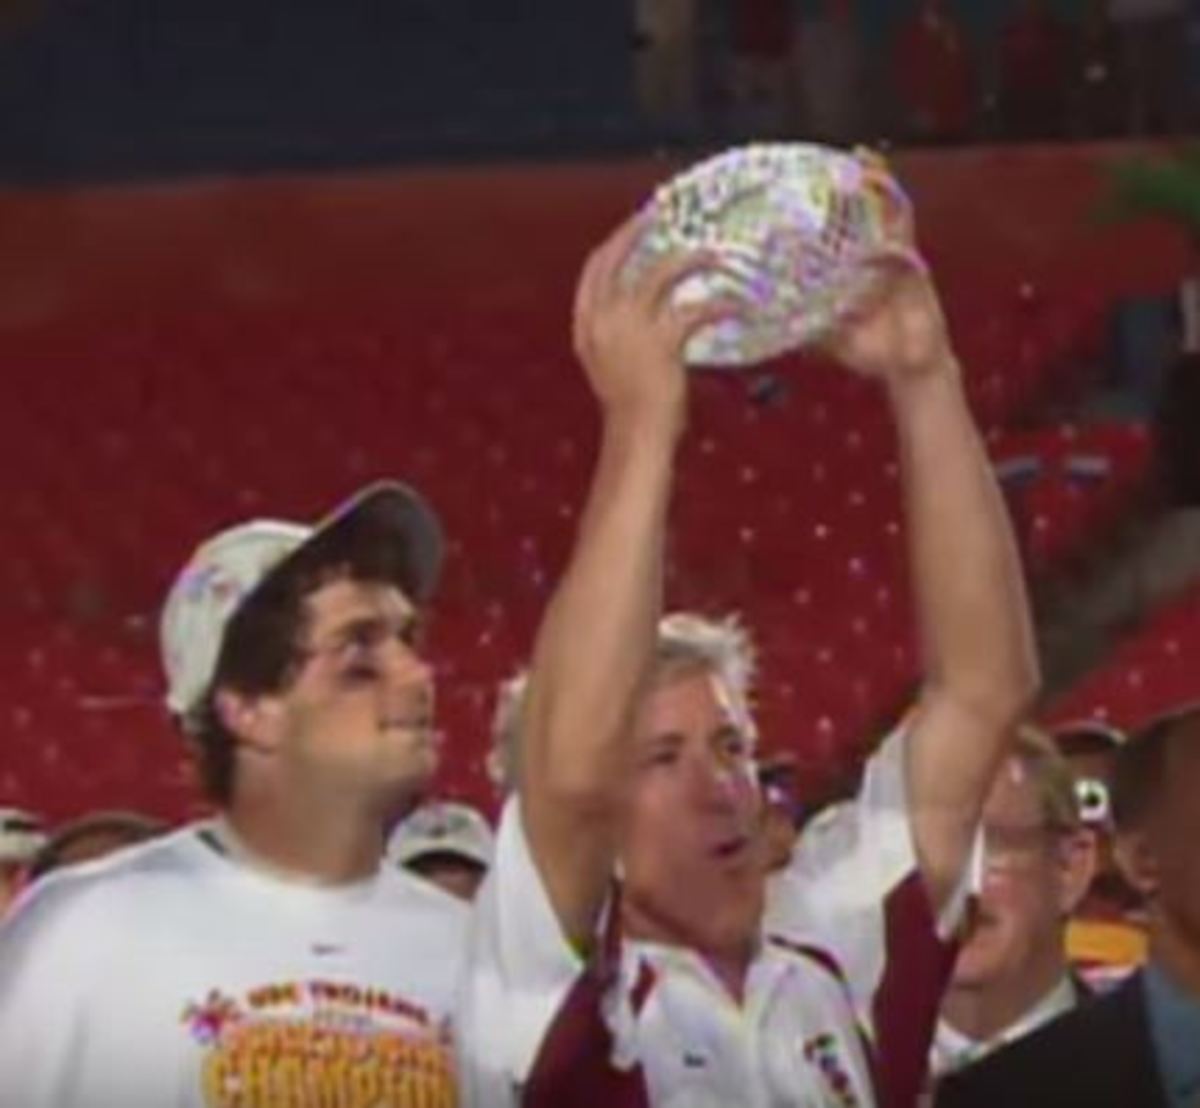 Pete Carrol seen holding the National Championship trophy.